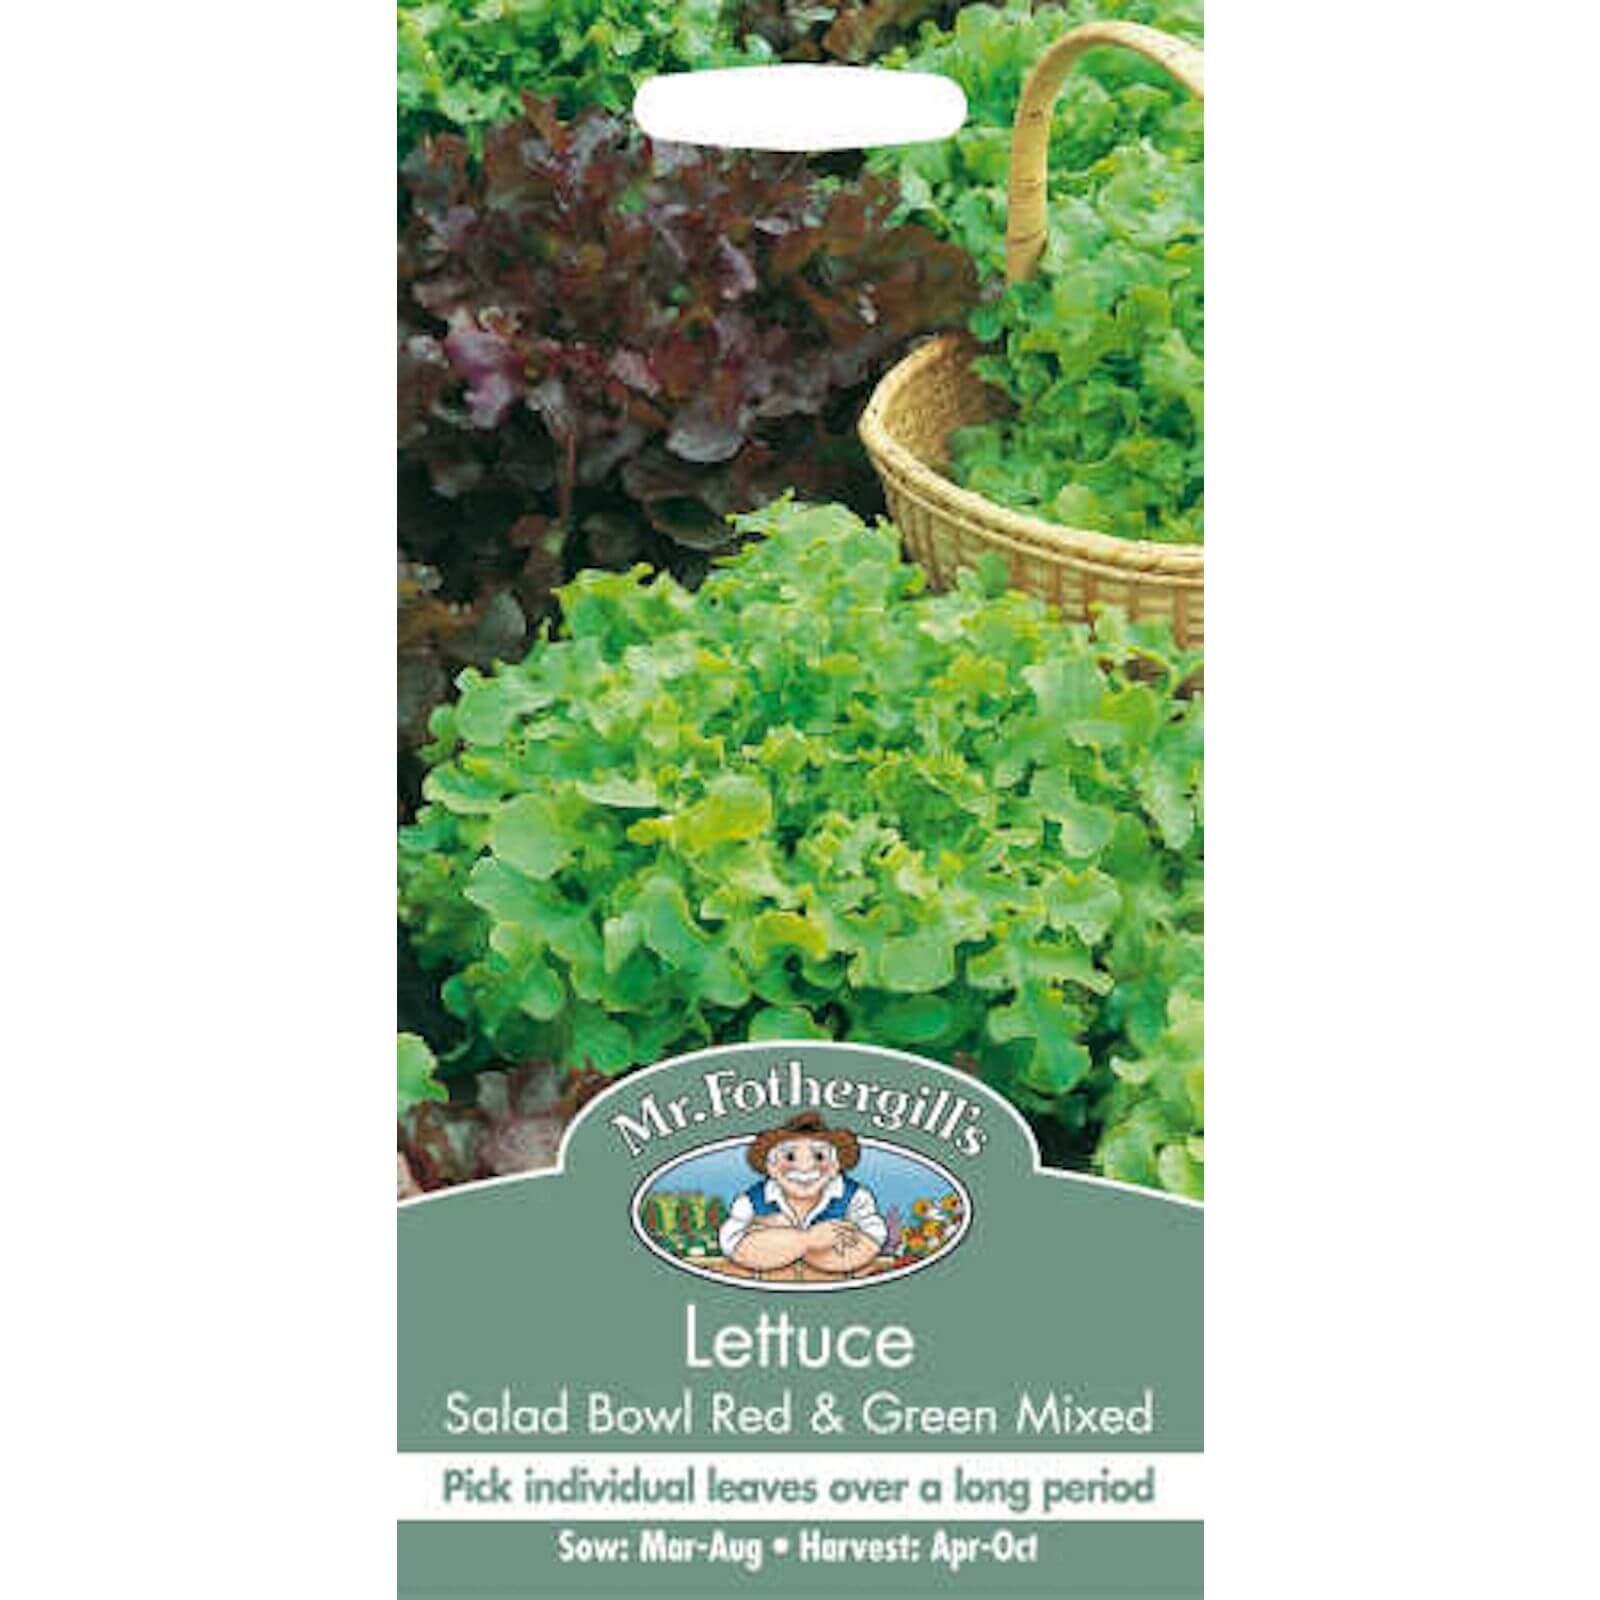 Mr. Fothergill's Lettuce Salad Bowl Seeds - Red And Green